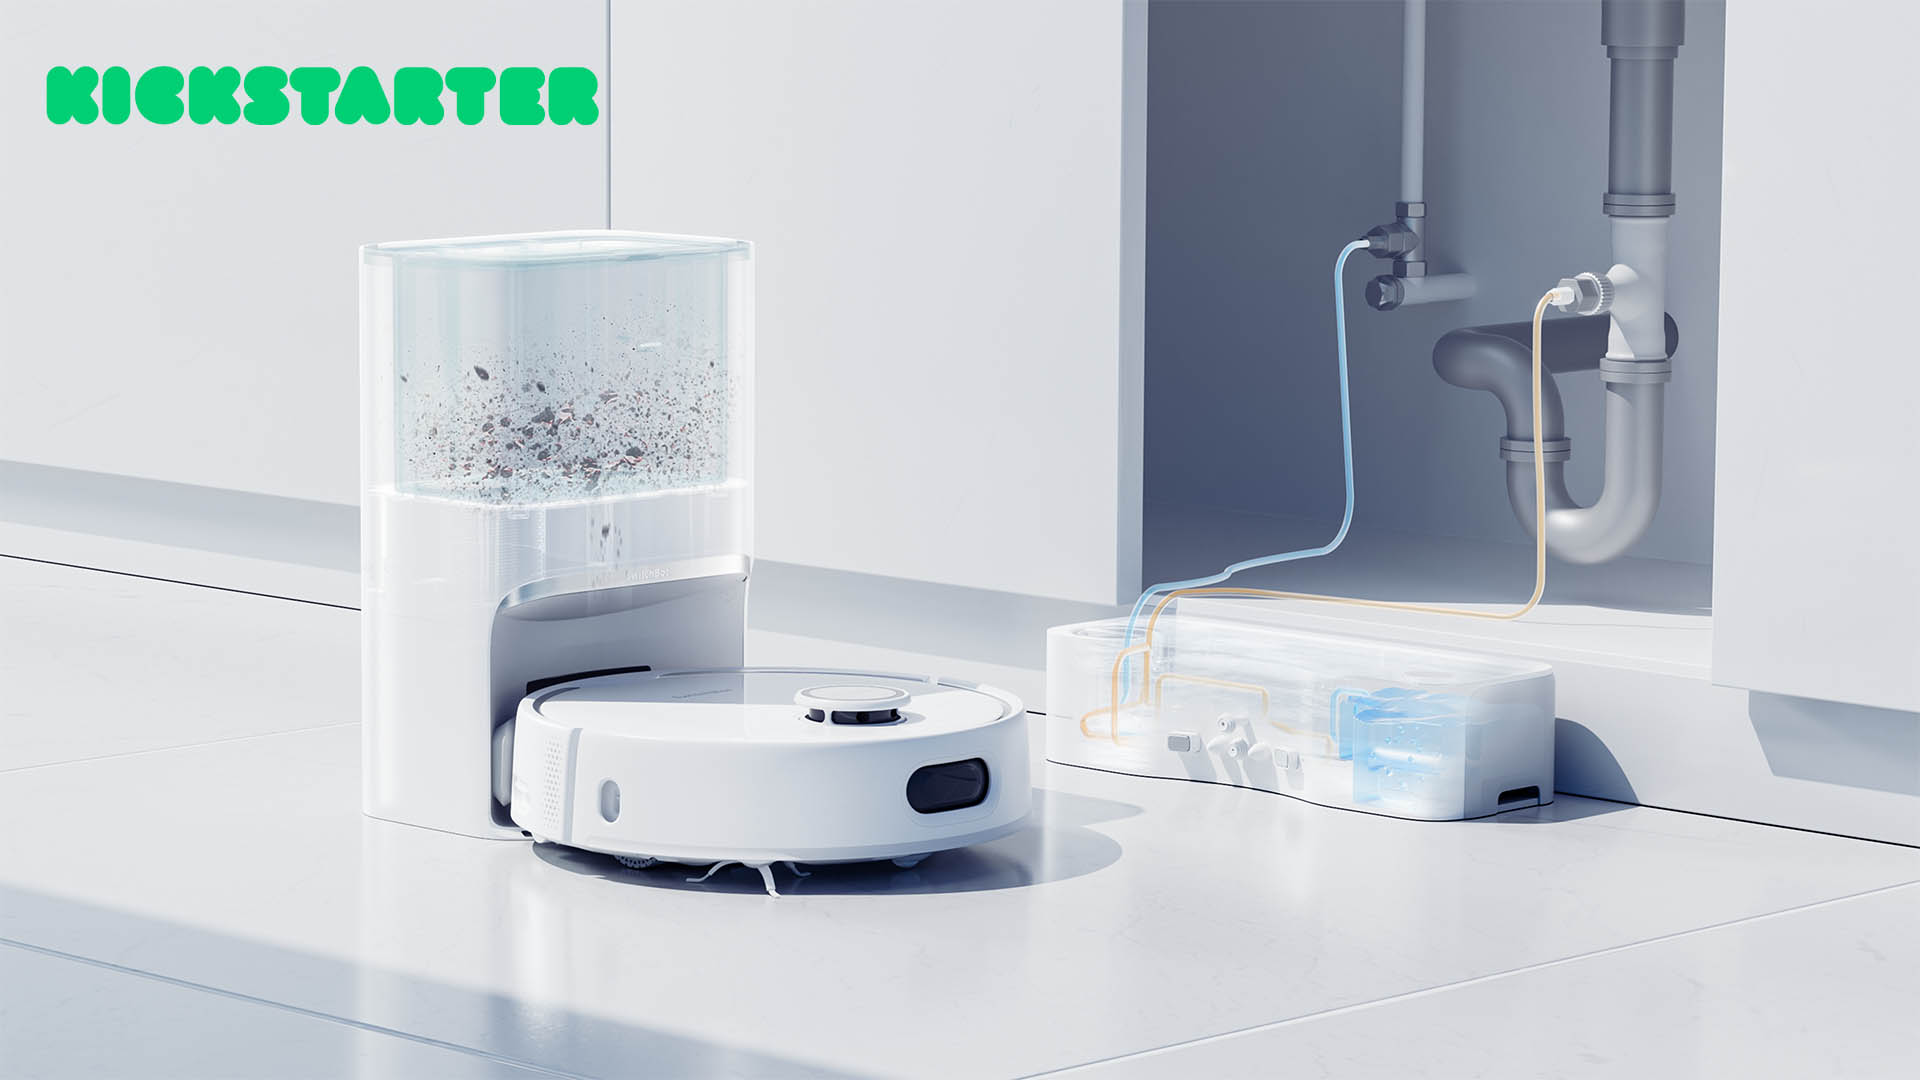 SwitchBot S10 Vacuum Cleaner Launches on Kickstarter